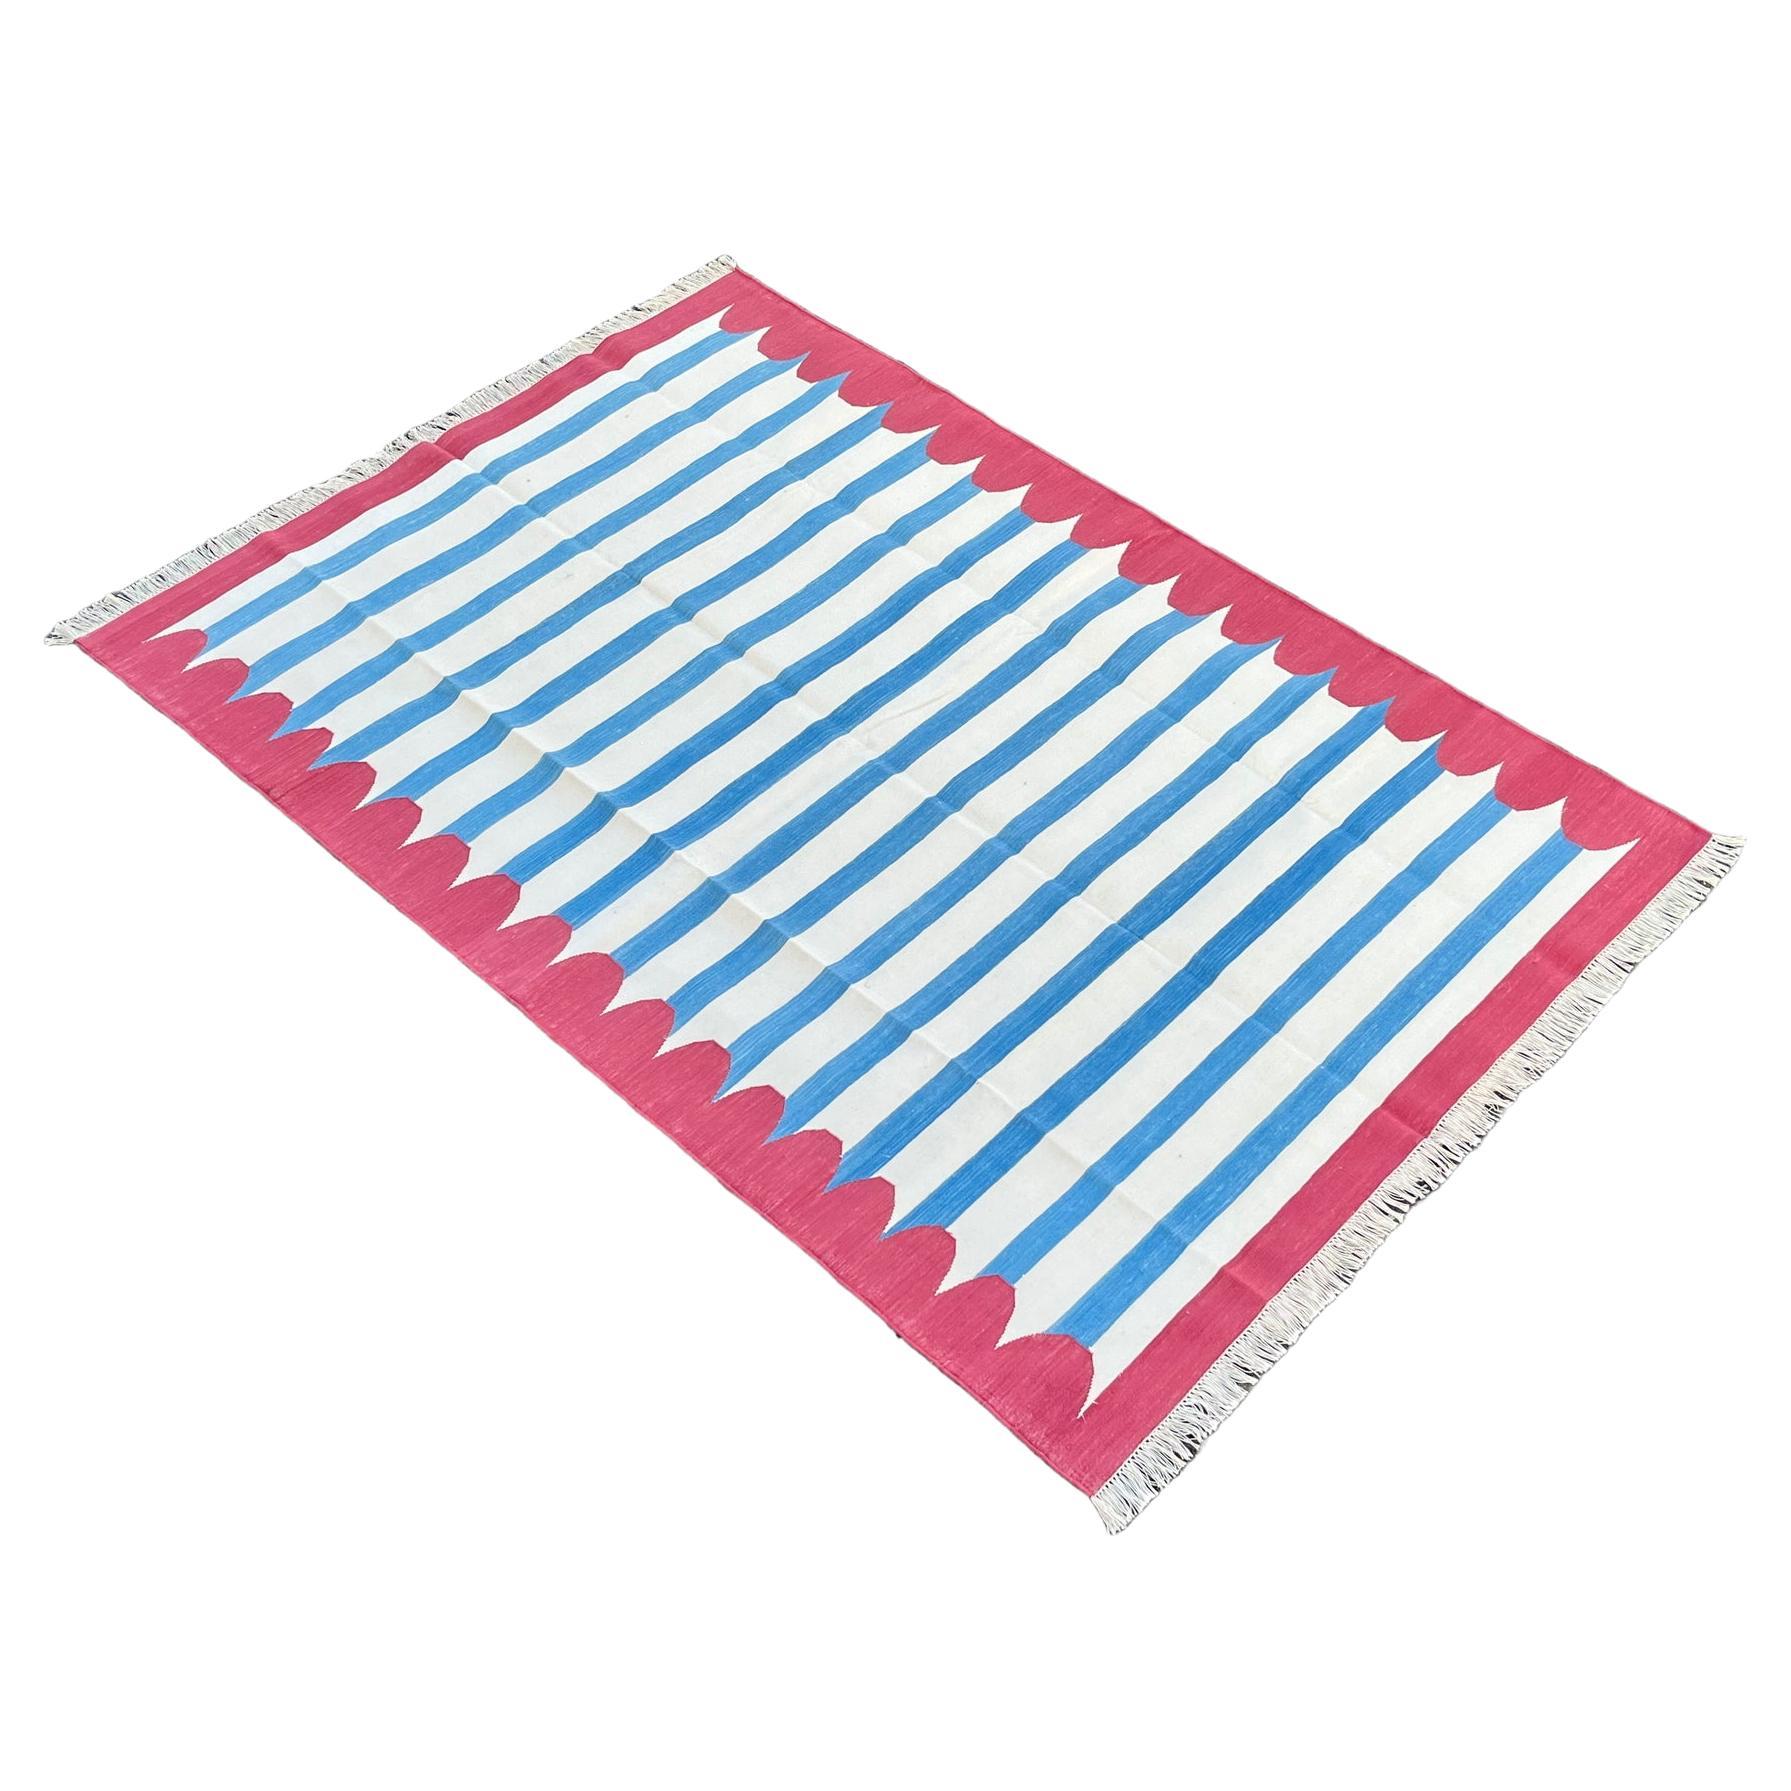 Handmade Cotton Area Flat Weave Rug, 5x7 Blue And Pink Striped Indian Dhurrie